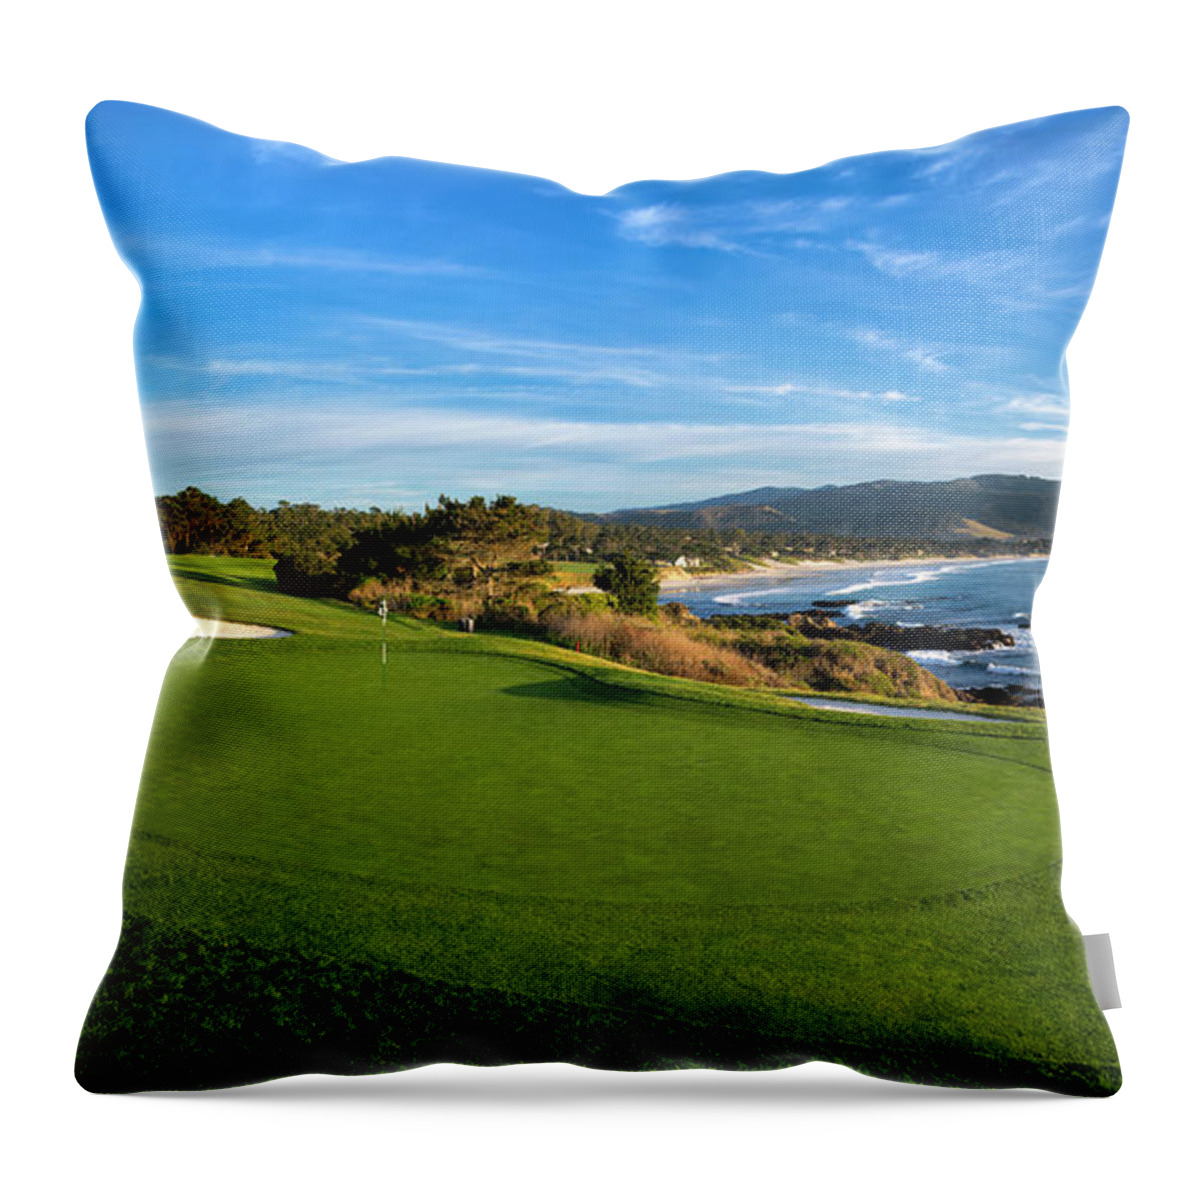 Photography Throw Pillow featuring the photograph 8th Hole At Pebble Beach Golf Links by Panoramic Images